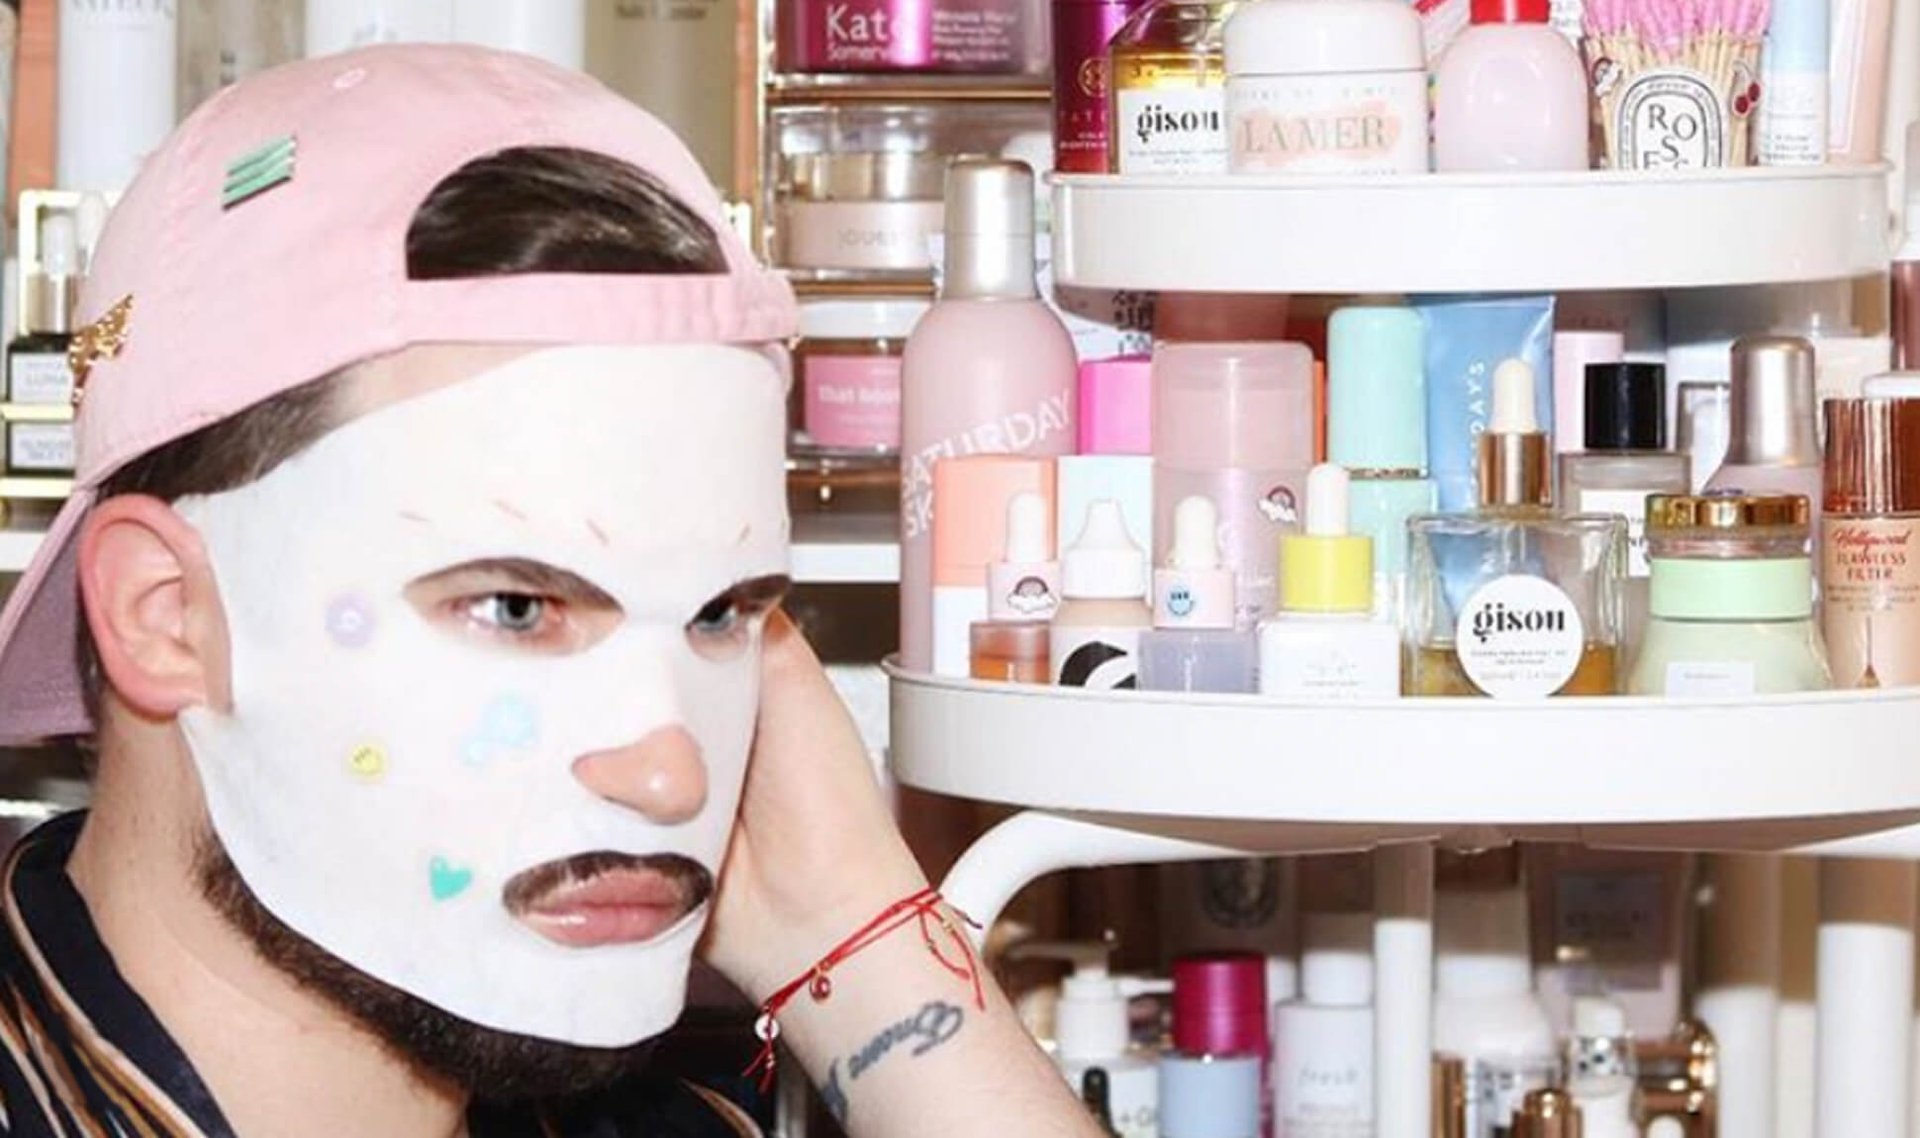 #Skincrush: Matt Woodcox of @dirtyboysgetclean Shares the Micellar Water He Can’t Live Without